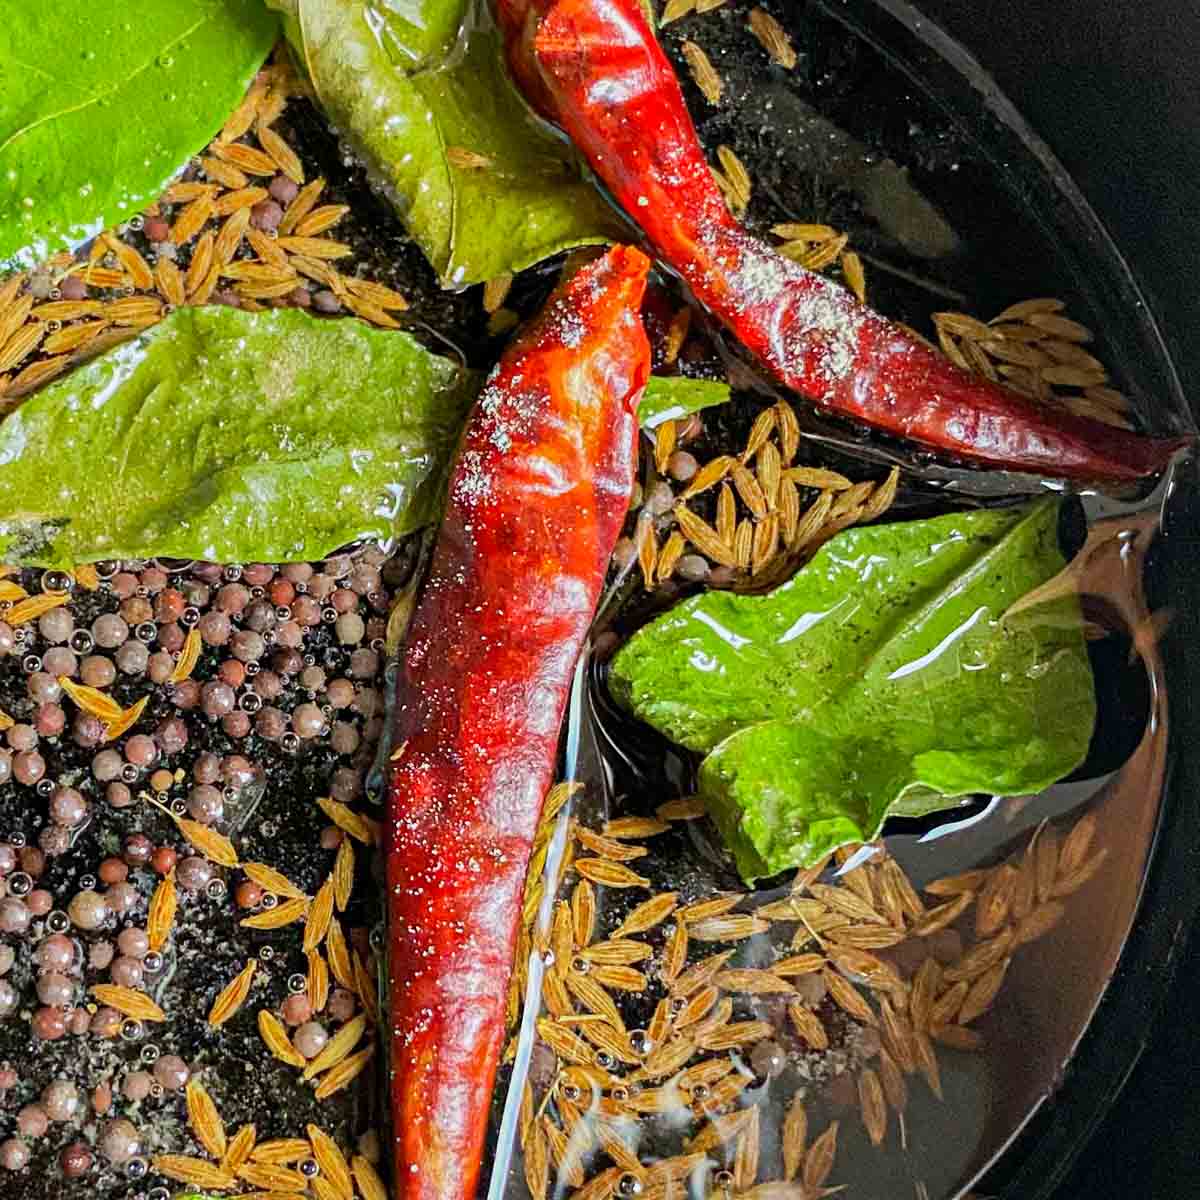 Curry leaves, cumin seeds, mustard seeds and chilis are being tempered in oil